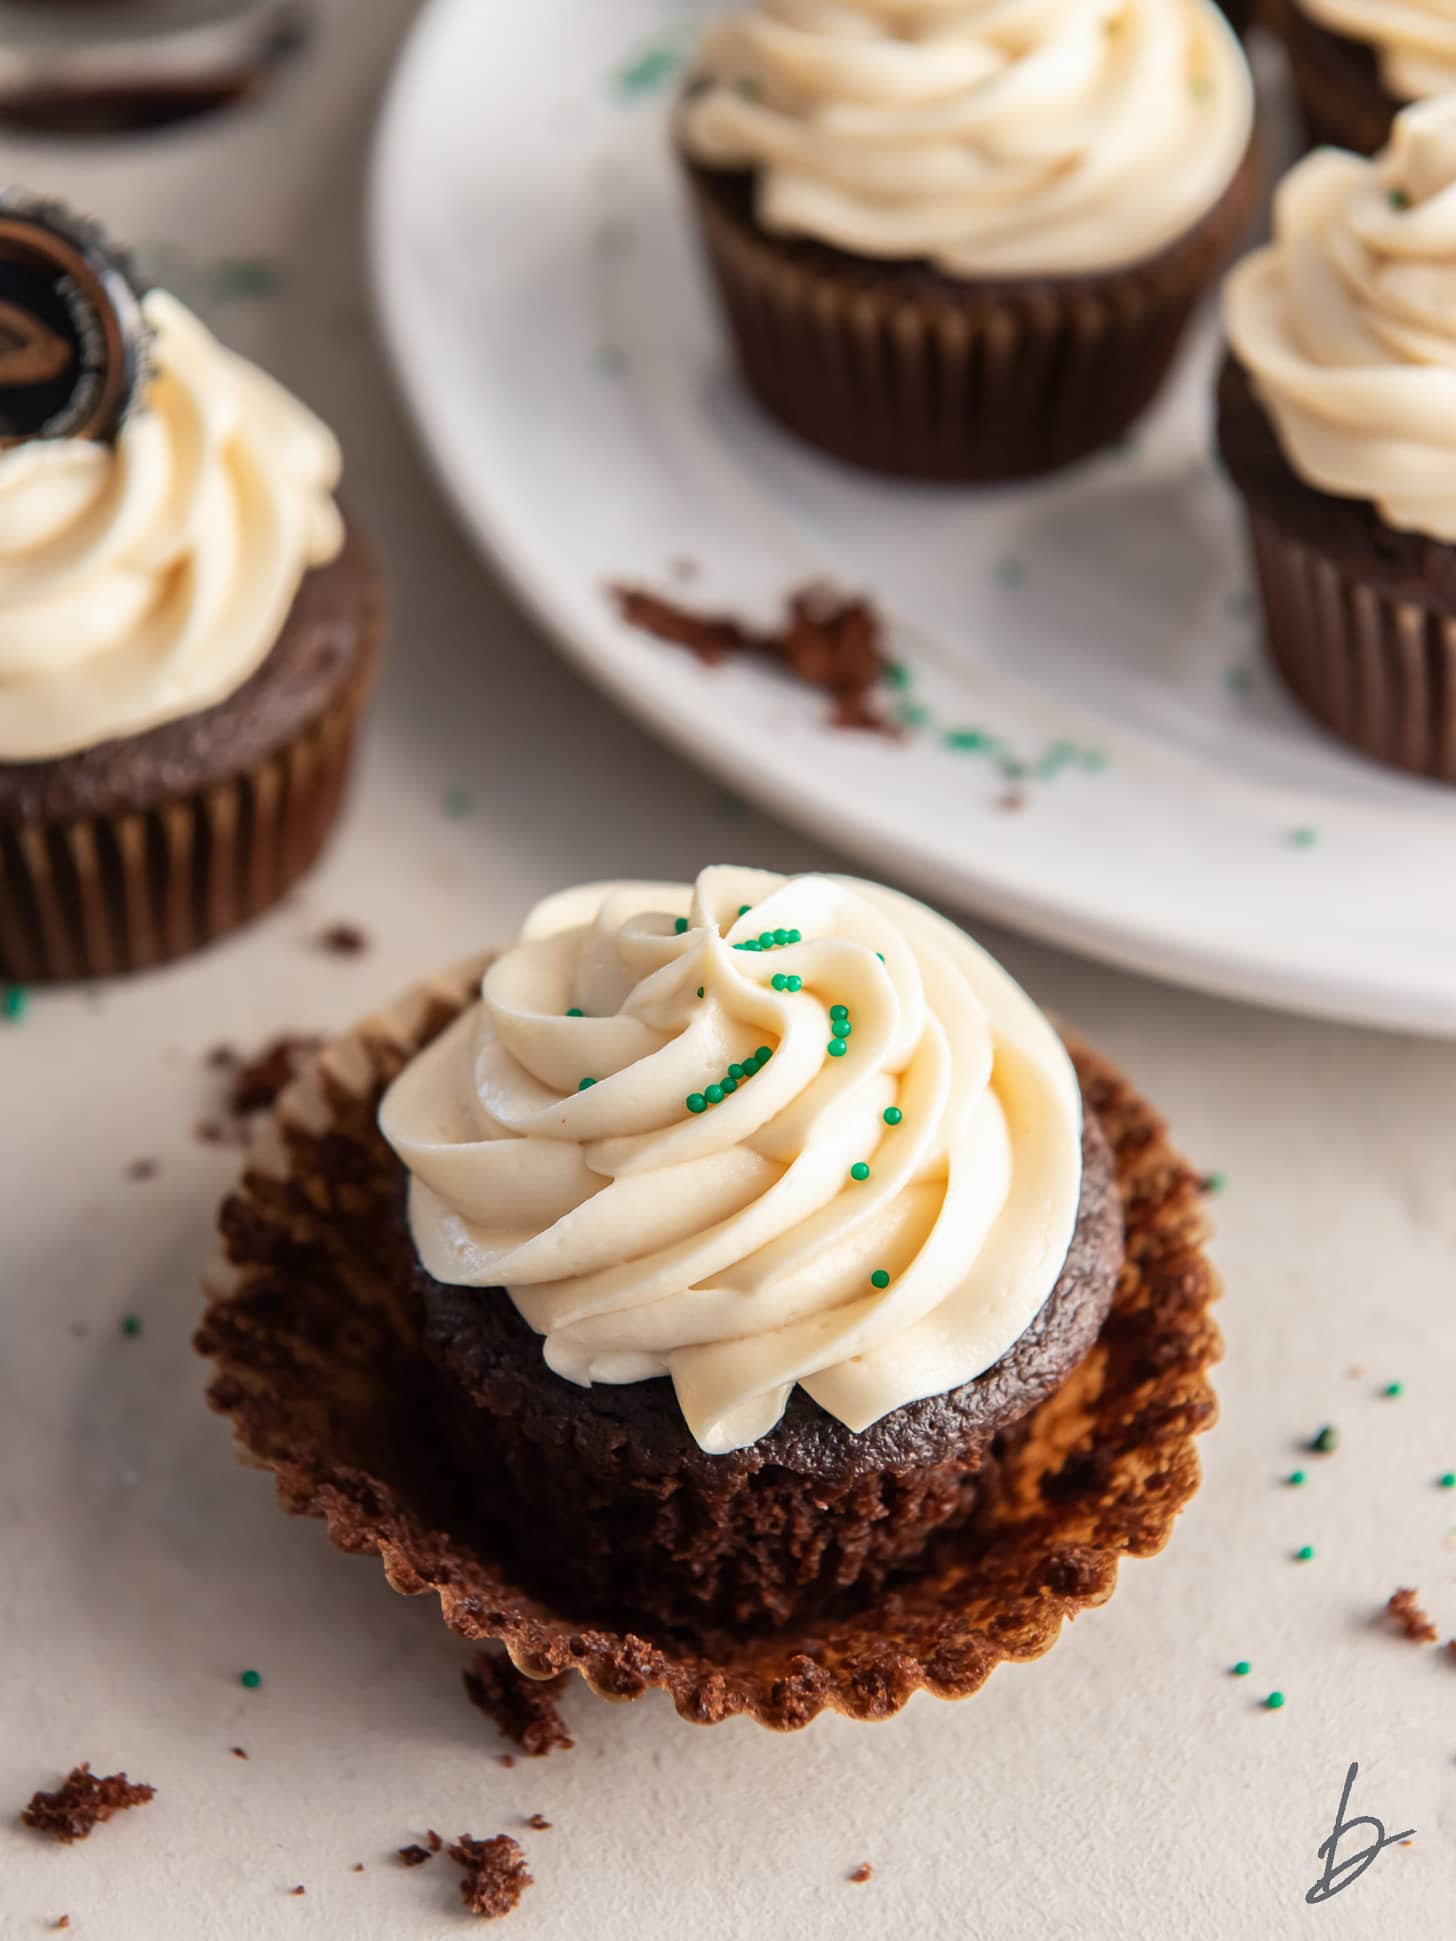 chocolate stout cupcake with irish cream frosting on paper cupcake liner.